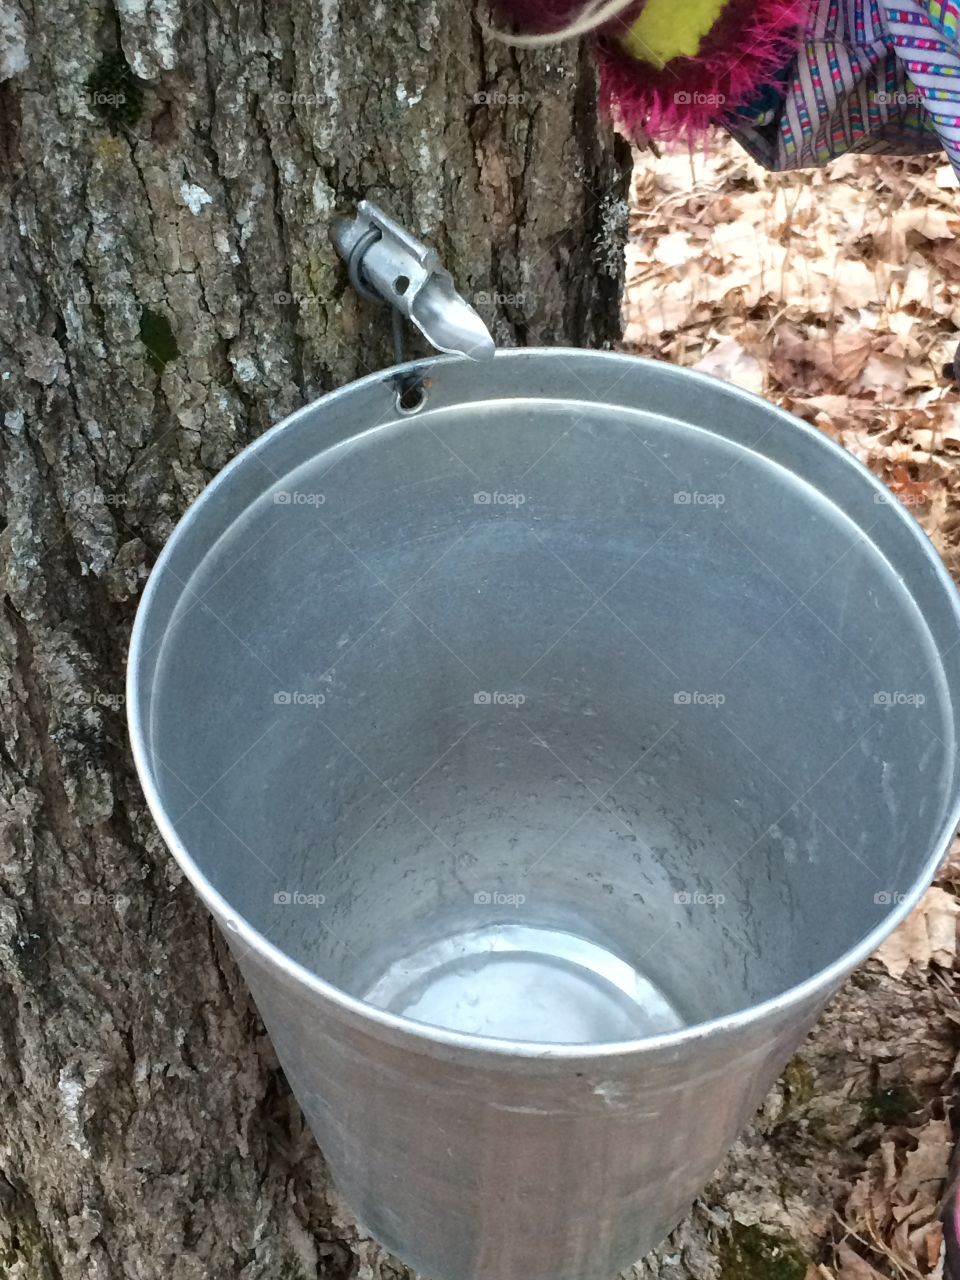 Northern Ontario maple syrup 